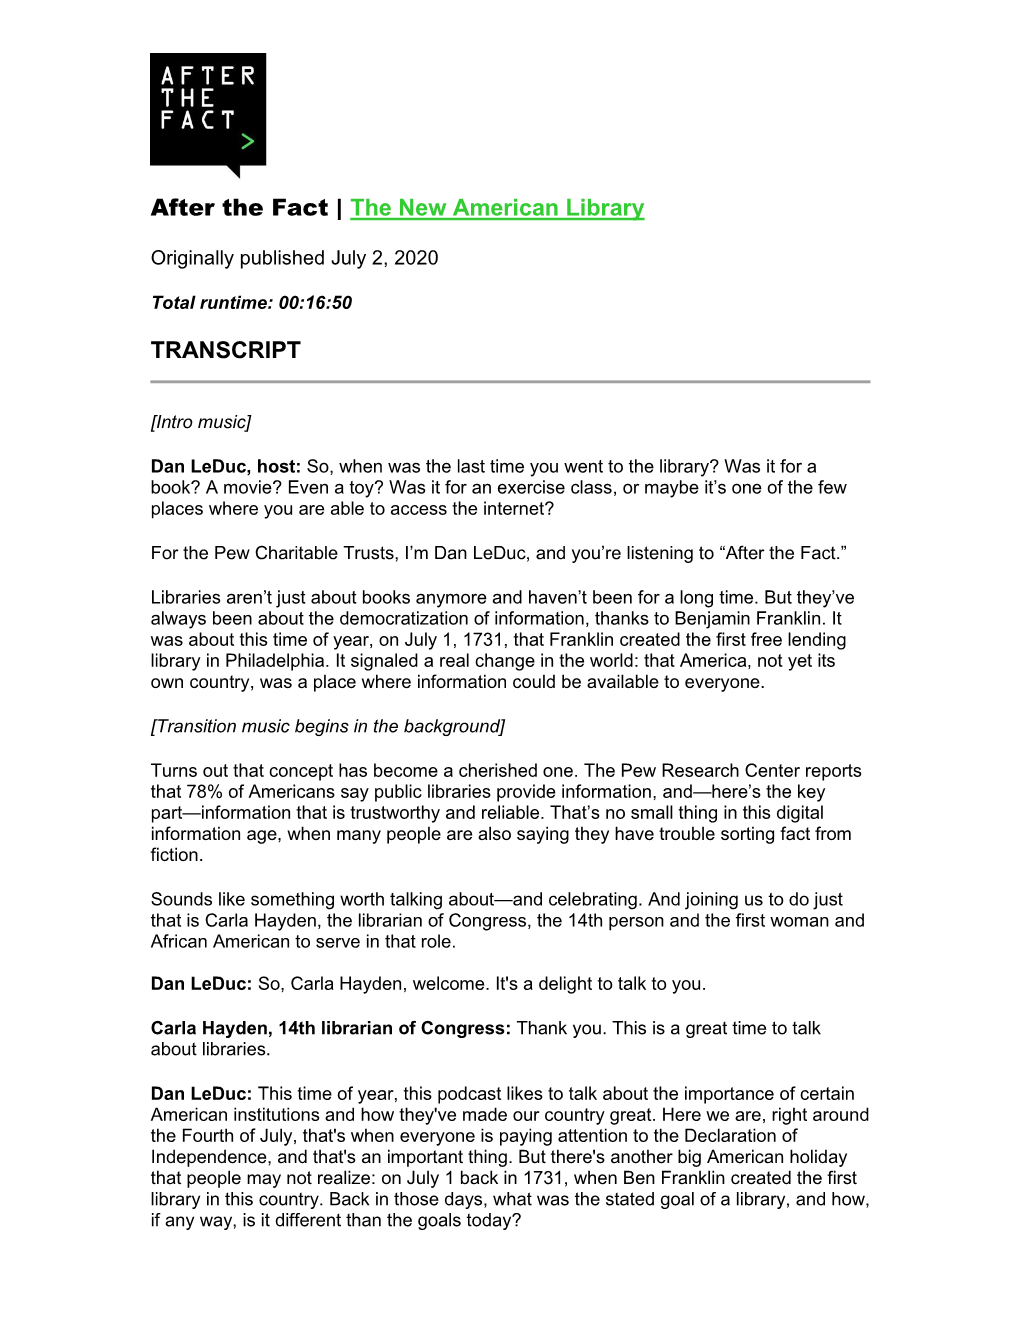 After the Fact | the New American Library TRANSCRIPT